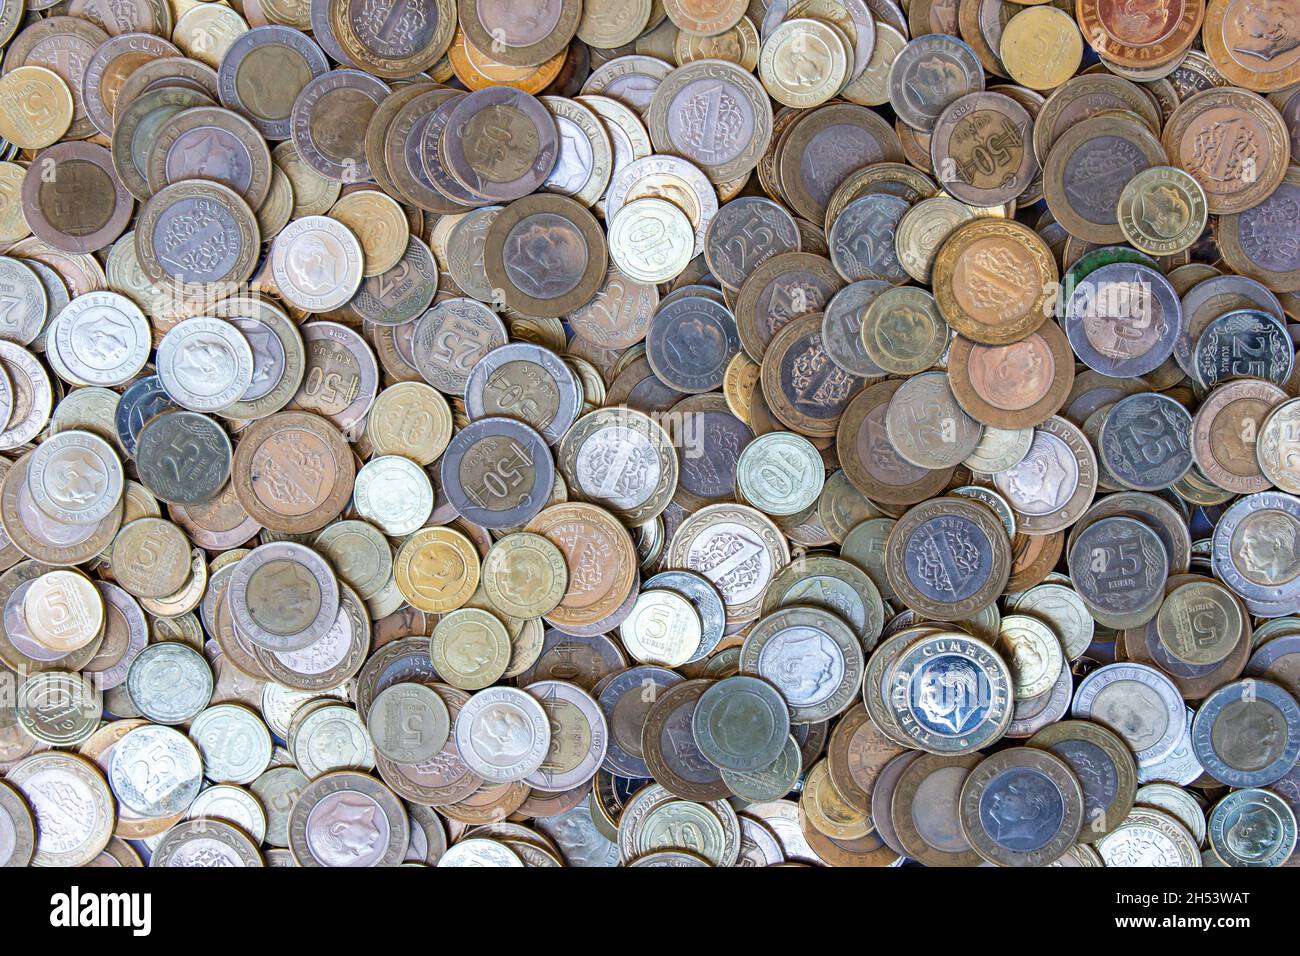 Turkish lira coins, top view of many Turkish lira coins. Turkey currency background photo. Stock Photo